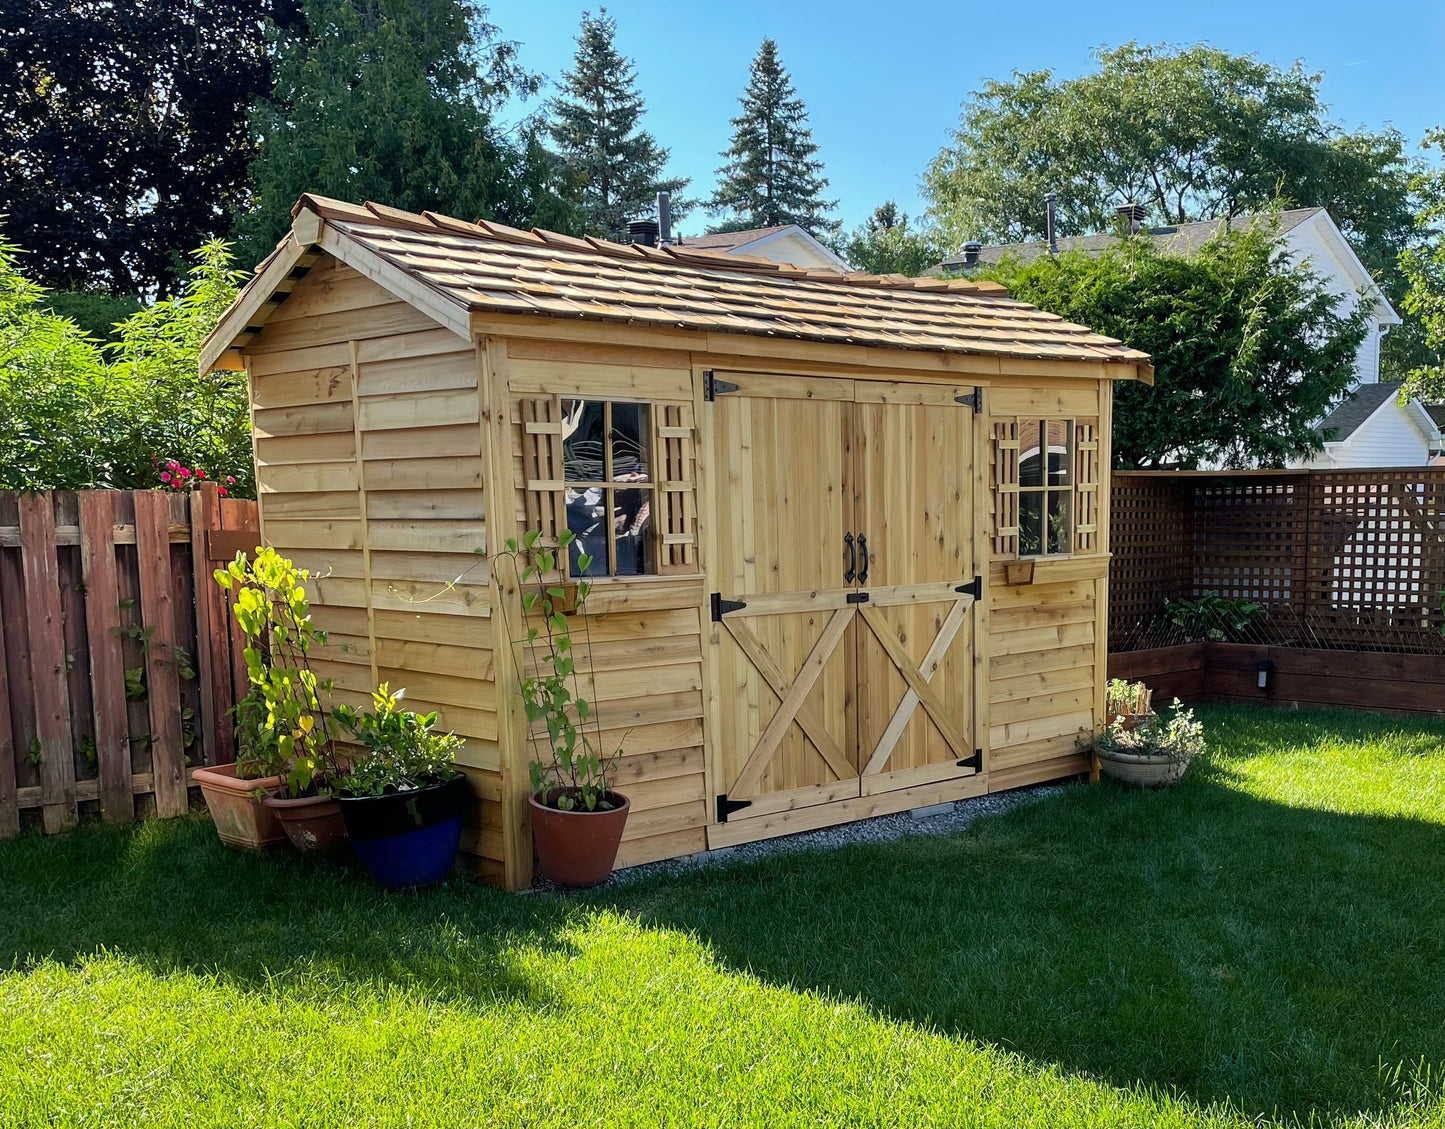 12 foot by 6 foot longhouse with double doors windows and window boxes